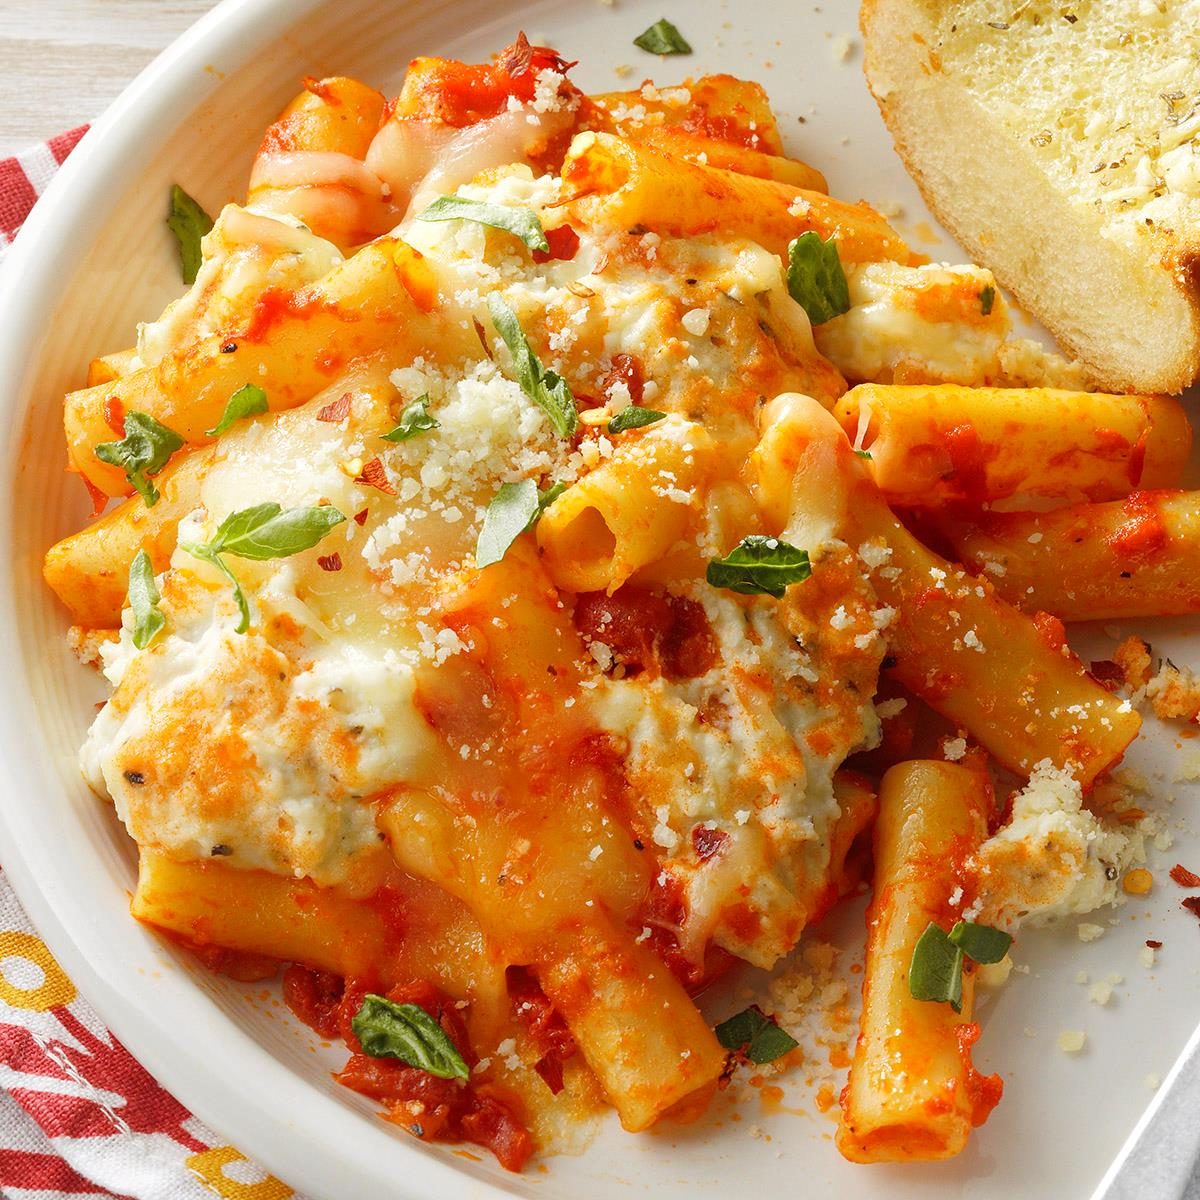 Baked Ziti Recipe (EASY to make) - Spend With Pennies